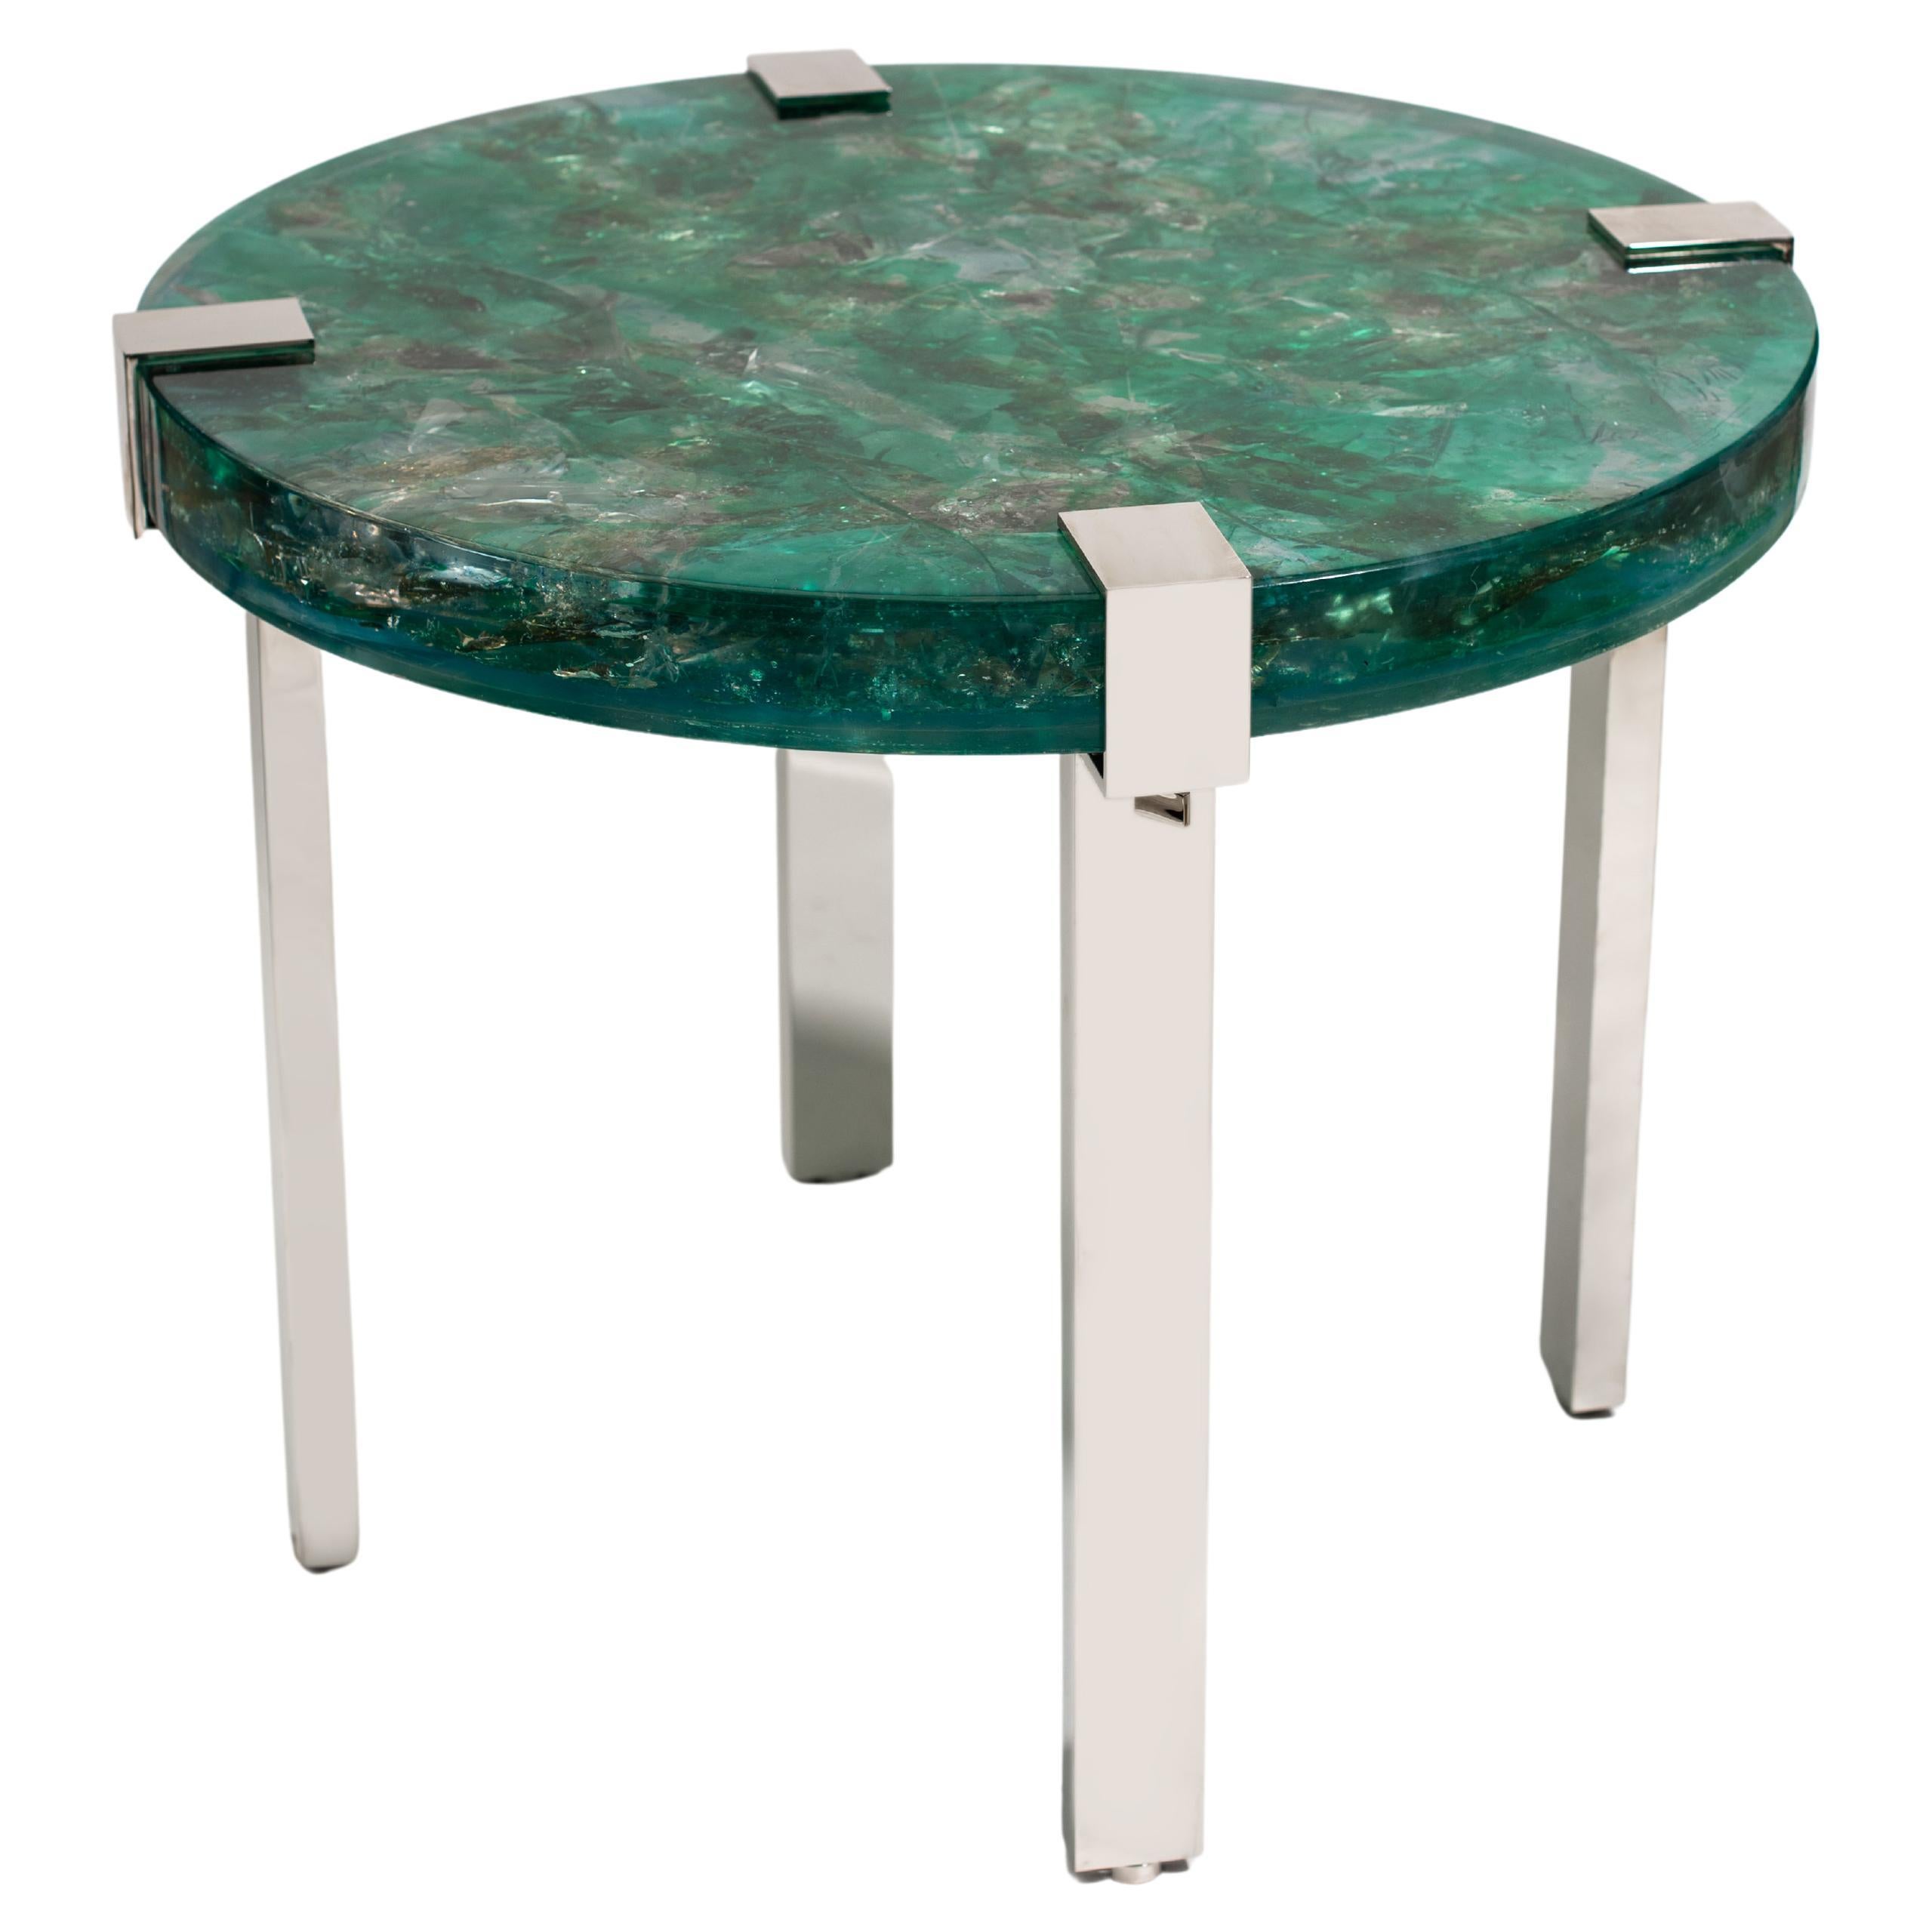 Pedestal Table in Resin and Nickel-Plated Brass